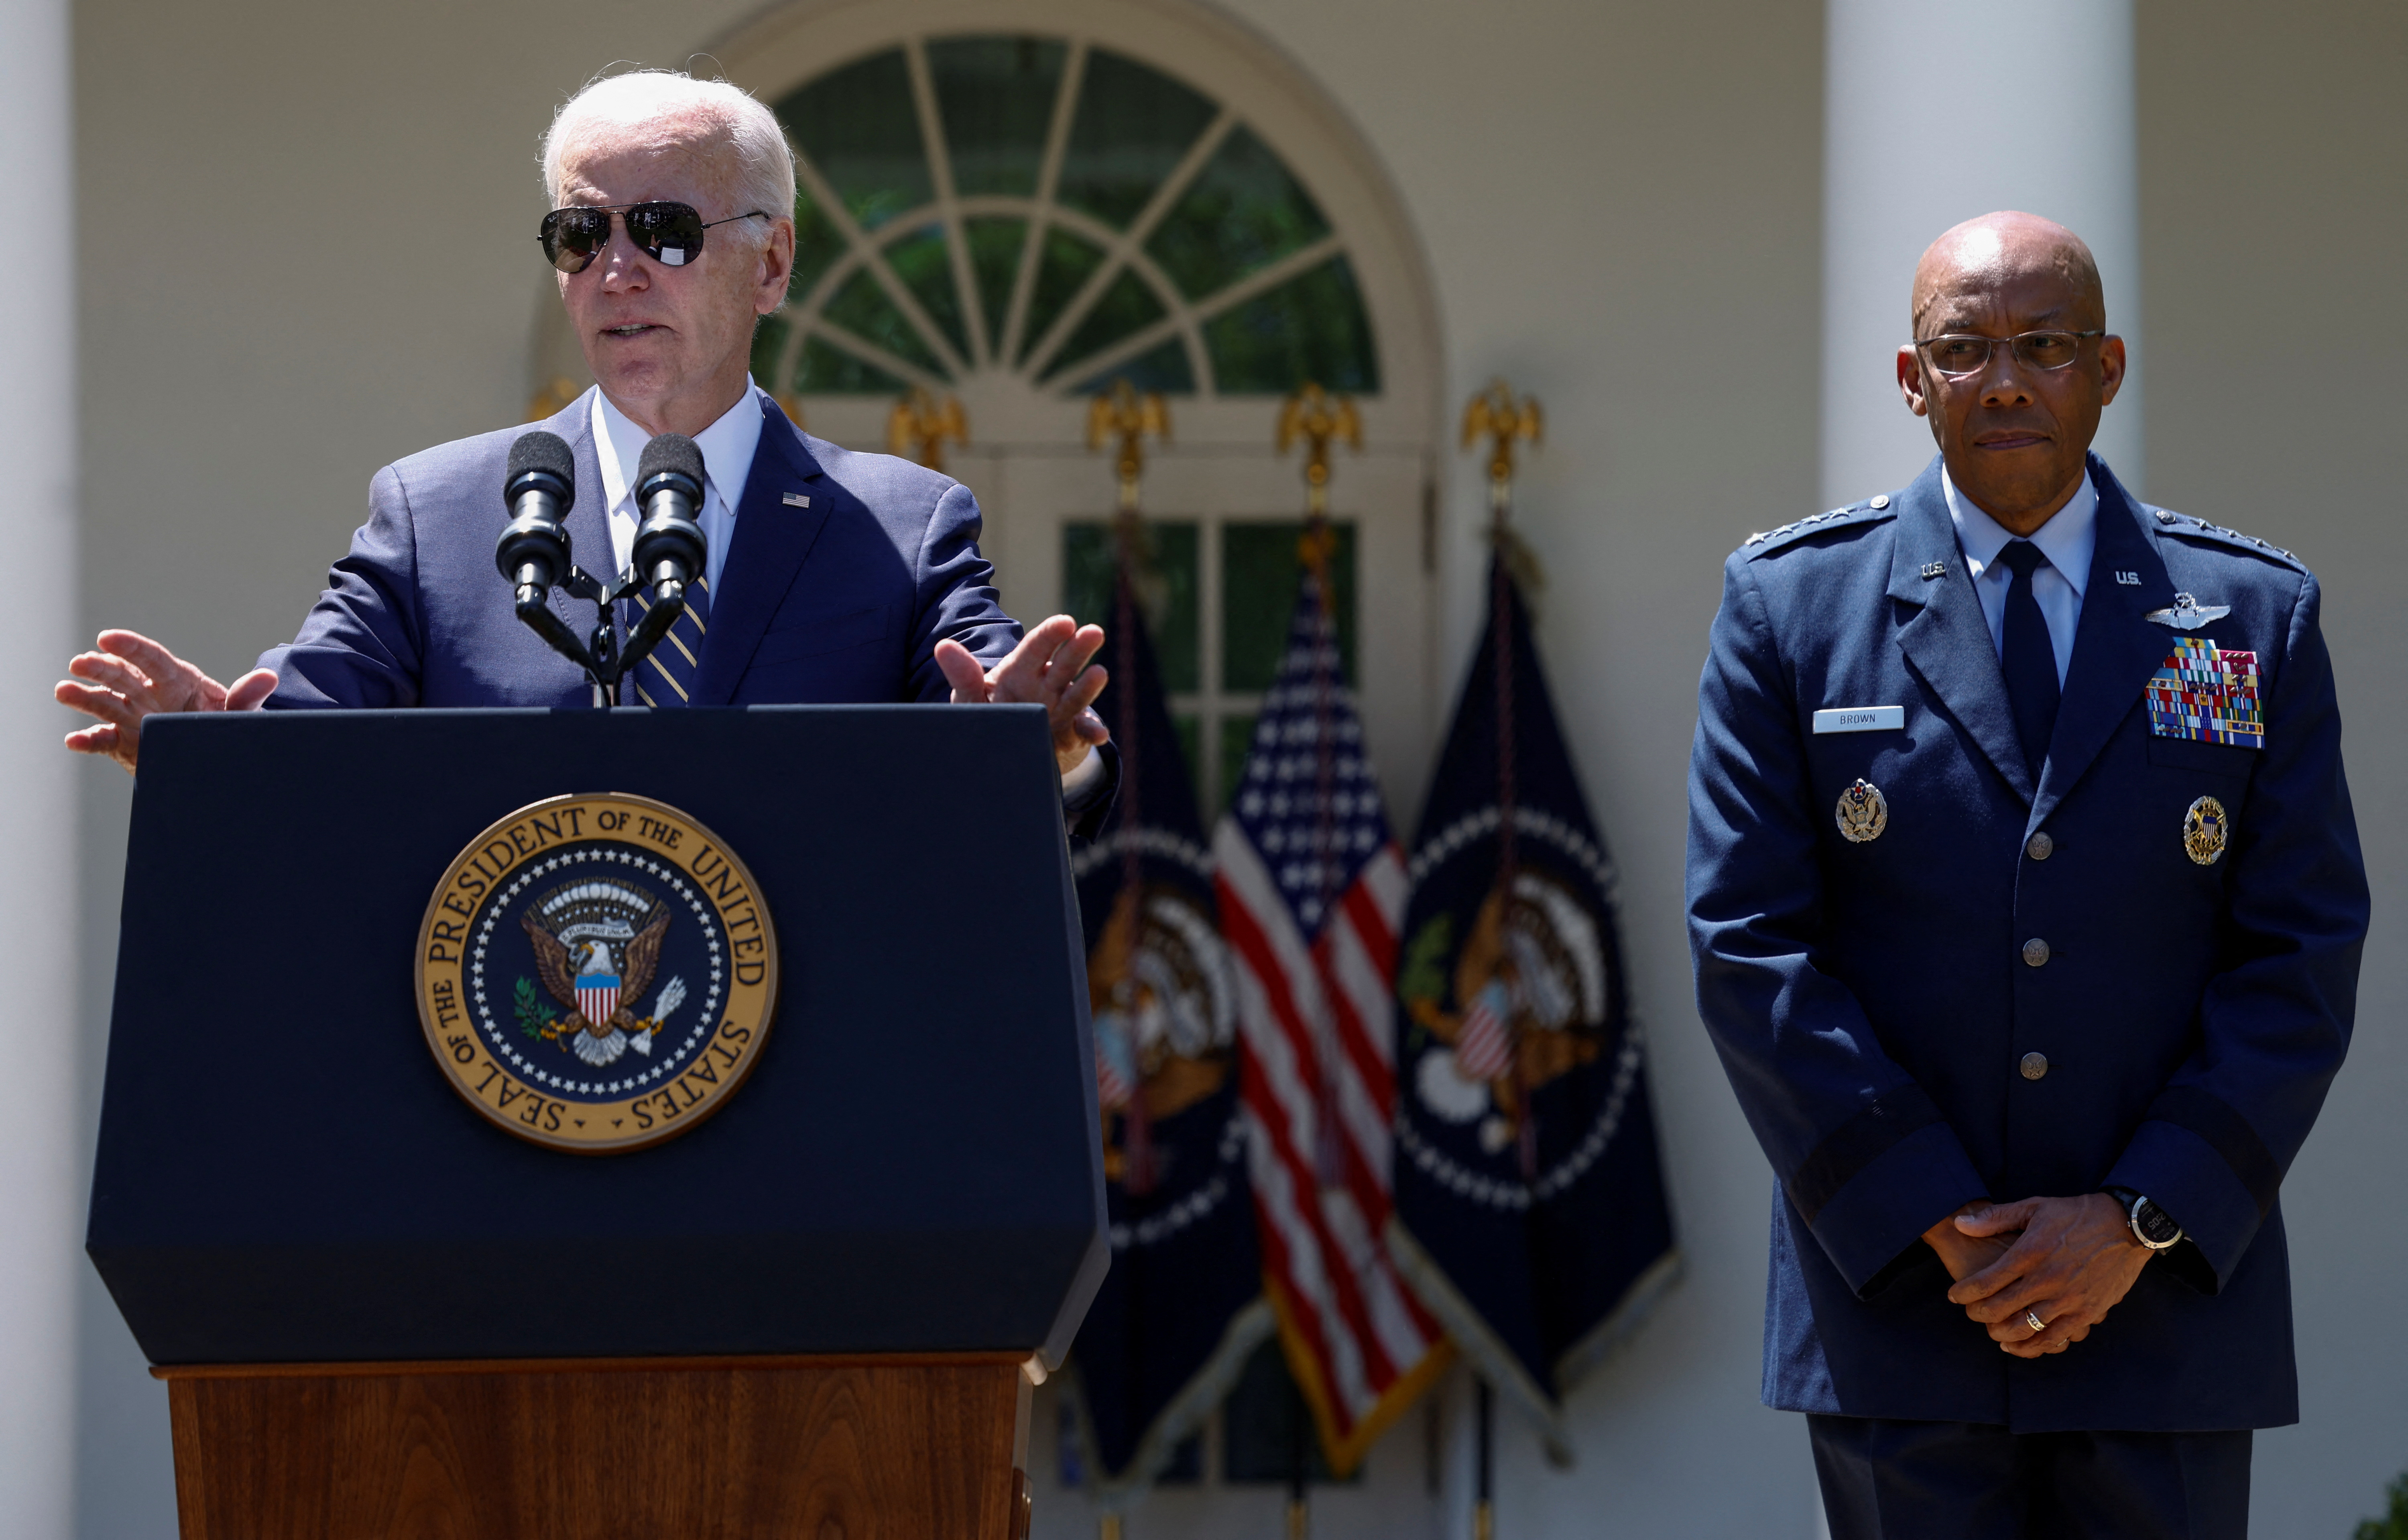 U.S. President Biden nominates Air Force General Brown to serve as next Joint Chiefs chair at White House event in Washington